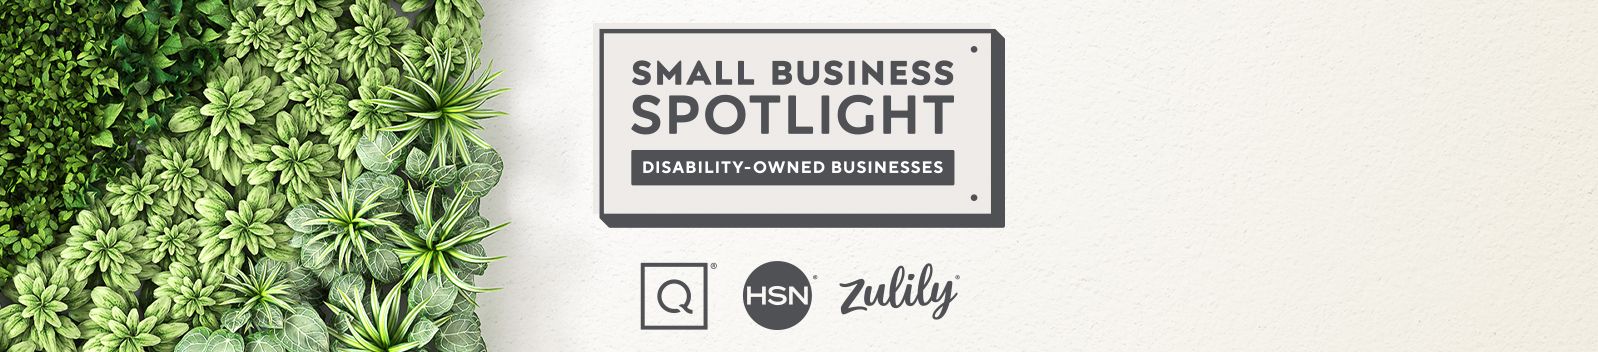 Small Business Spotlight: Disability-Owned Businesses 